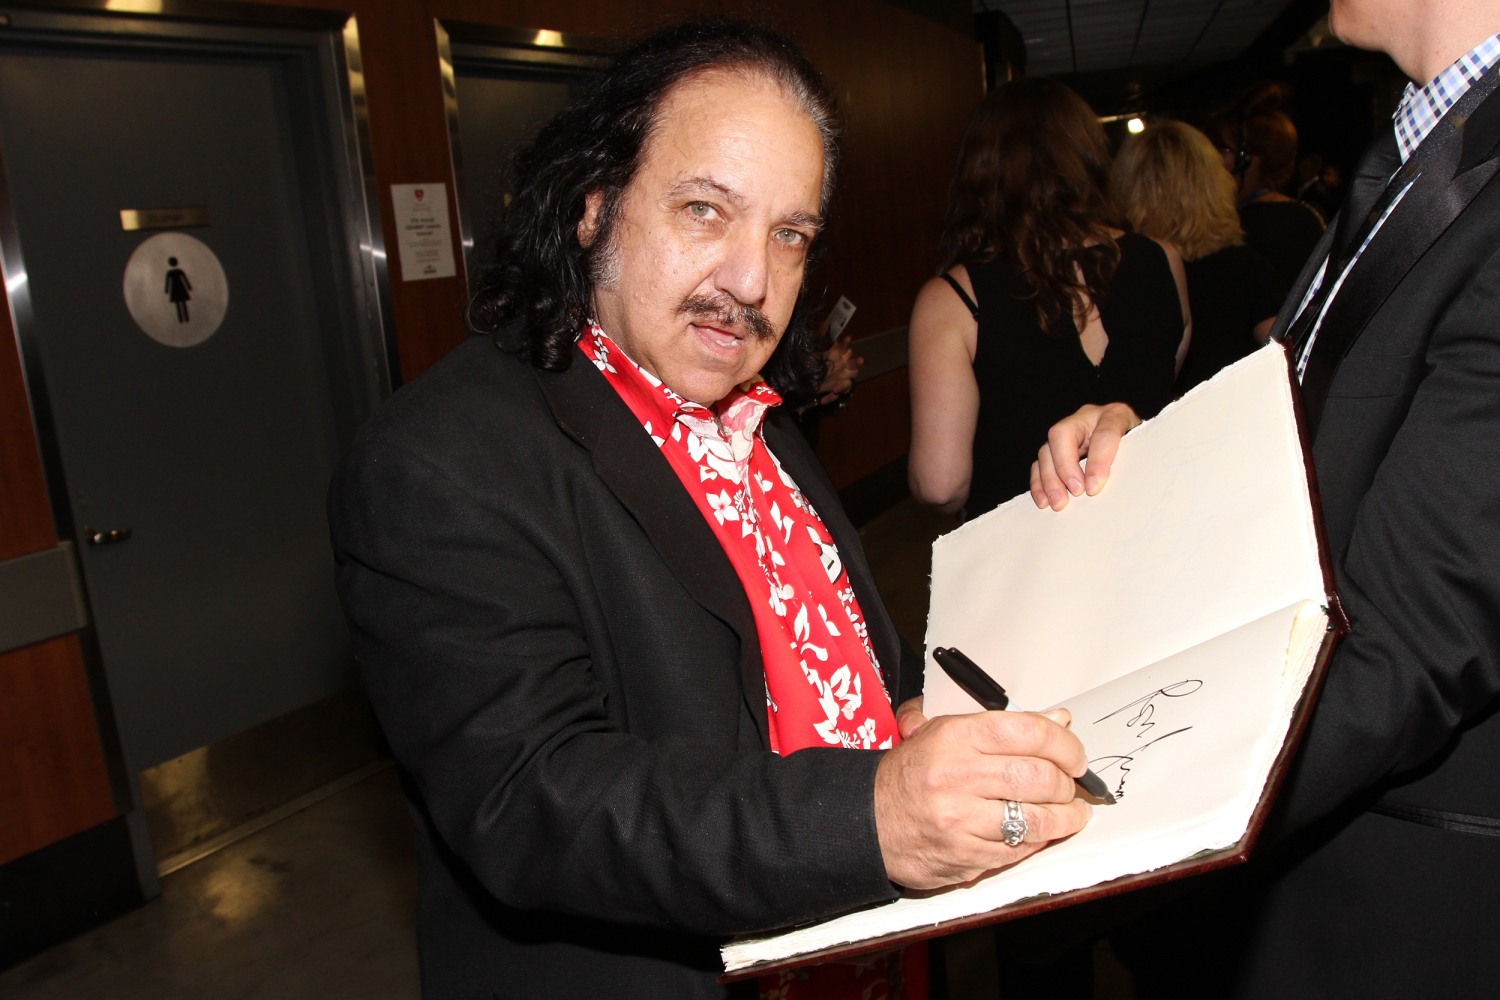 Sxe Video Xxx Raep - Porn actor Ron Jeremy charged with rape, sexual assault